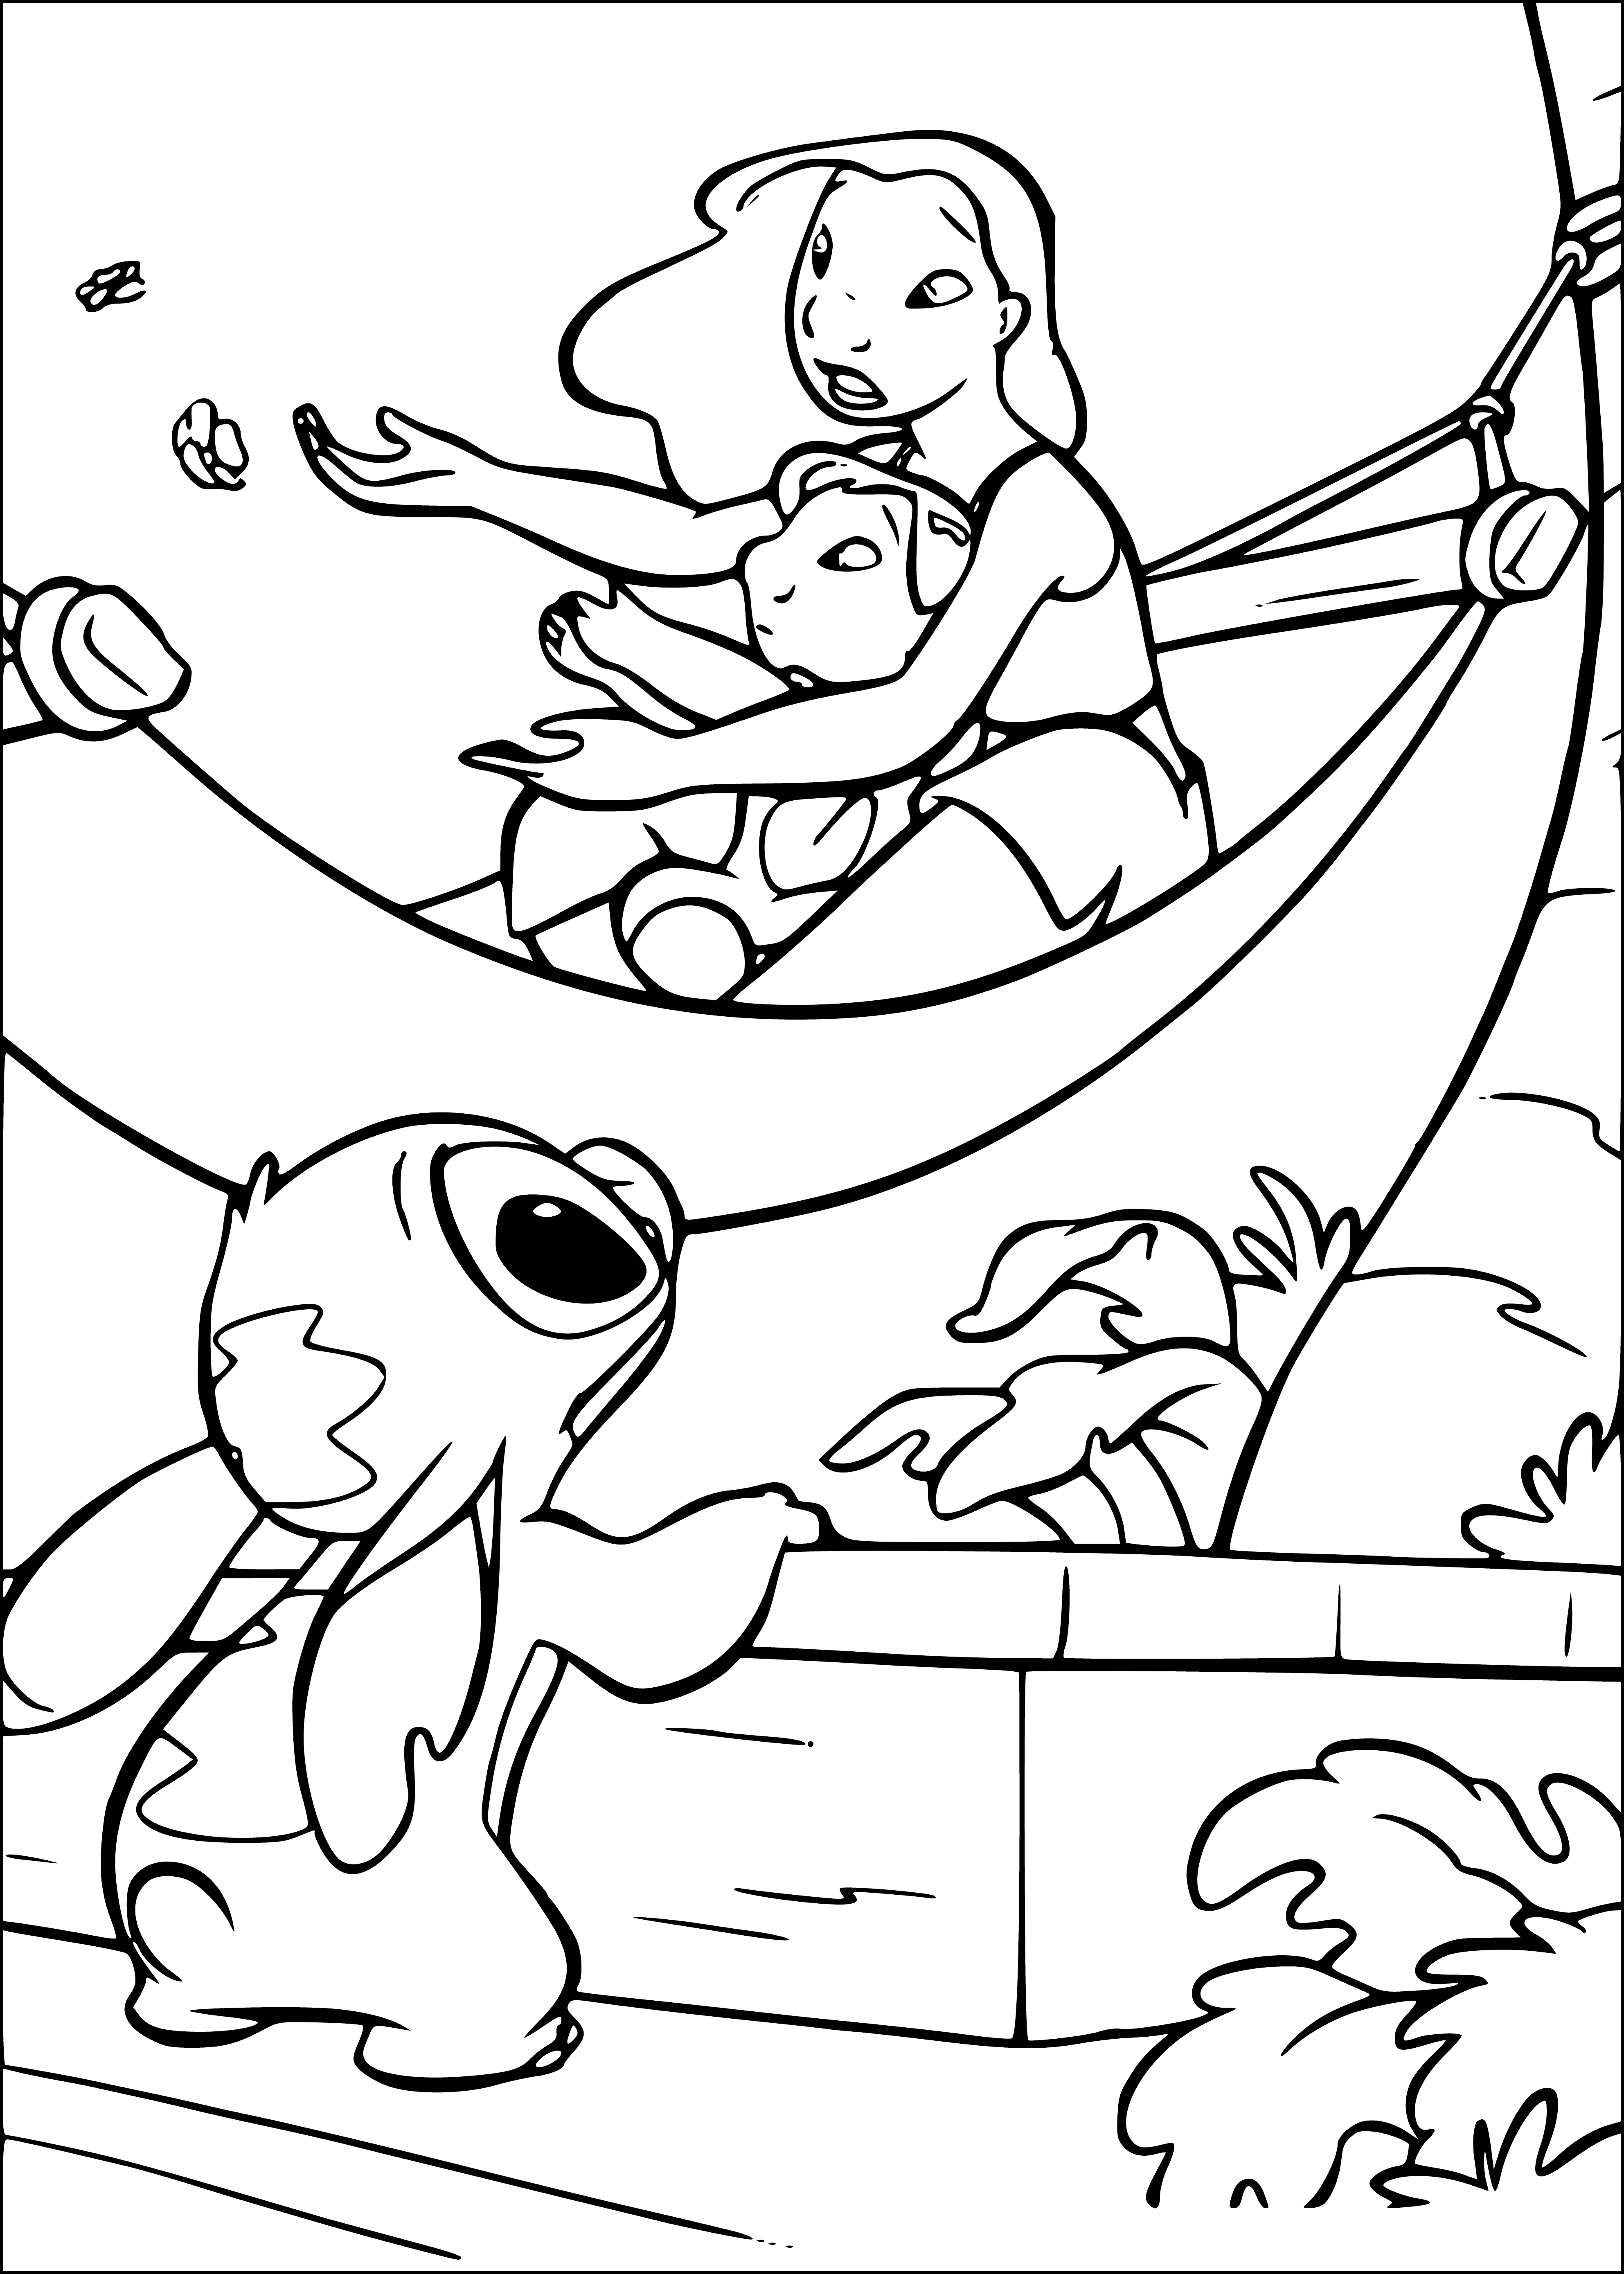 Stitch is lonely coloring page